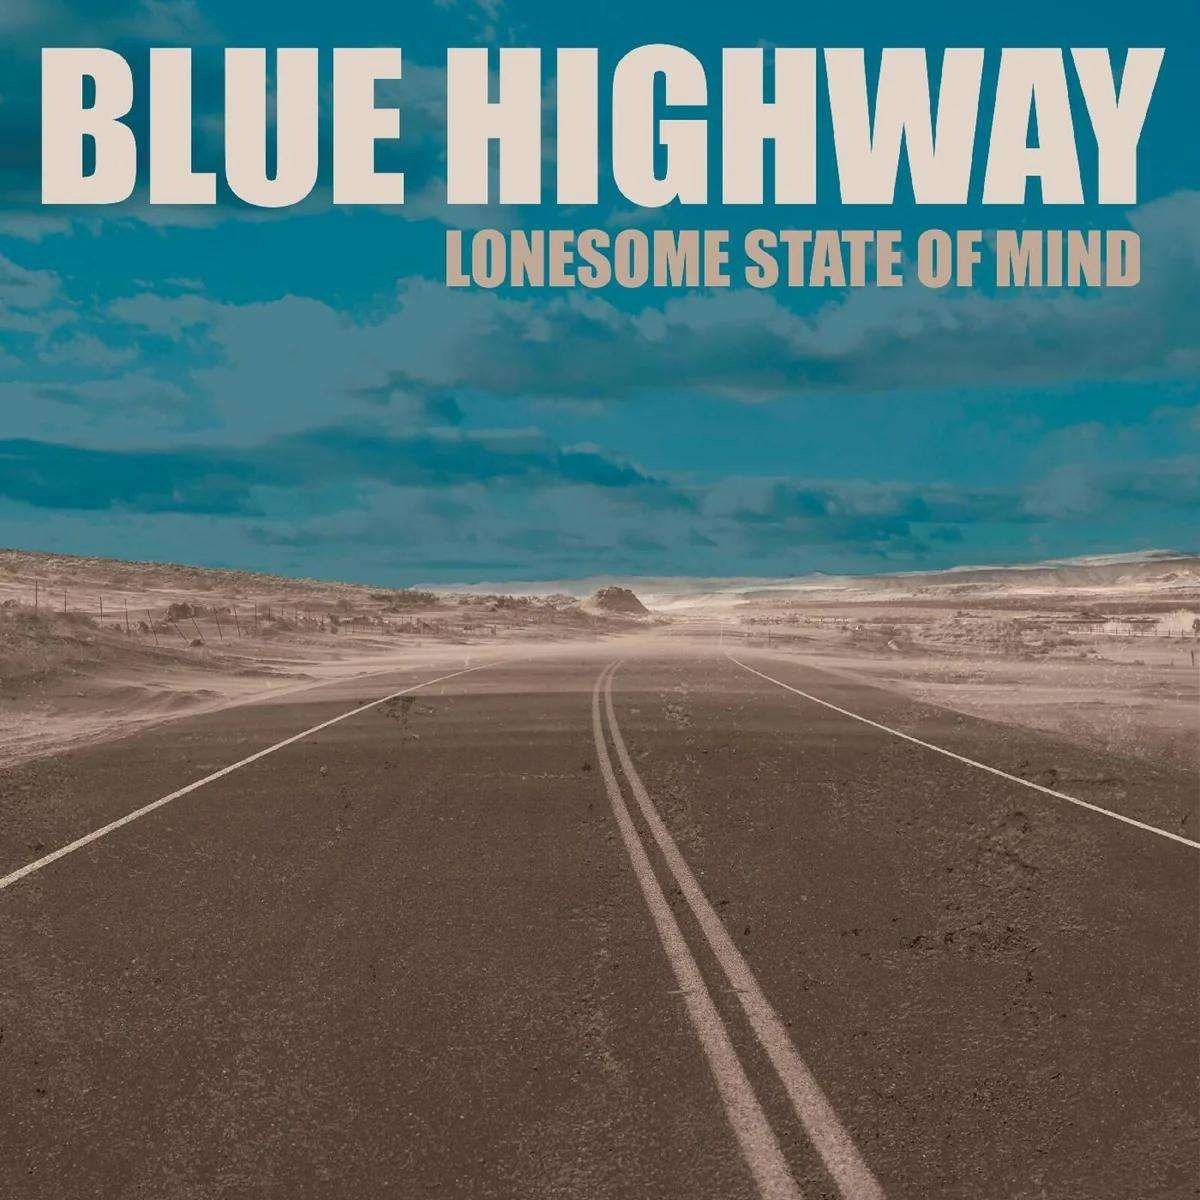 CD Shop - BLUE HIGHWAY LONESOME STATE OF MIND